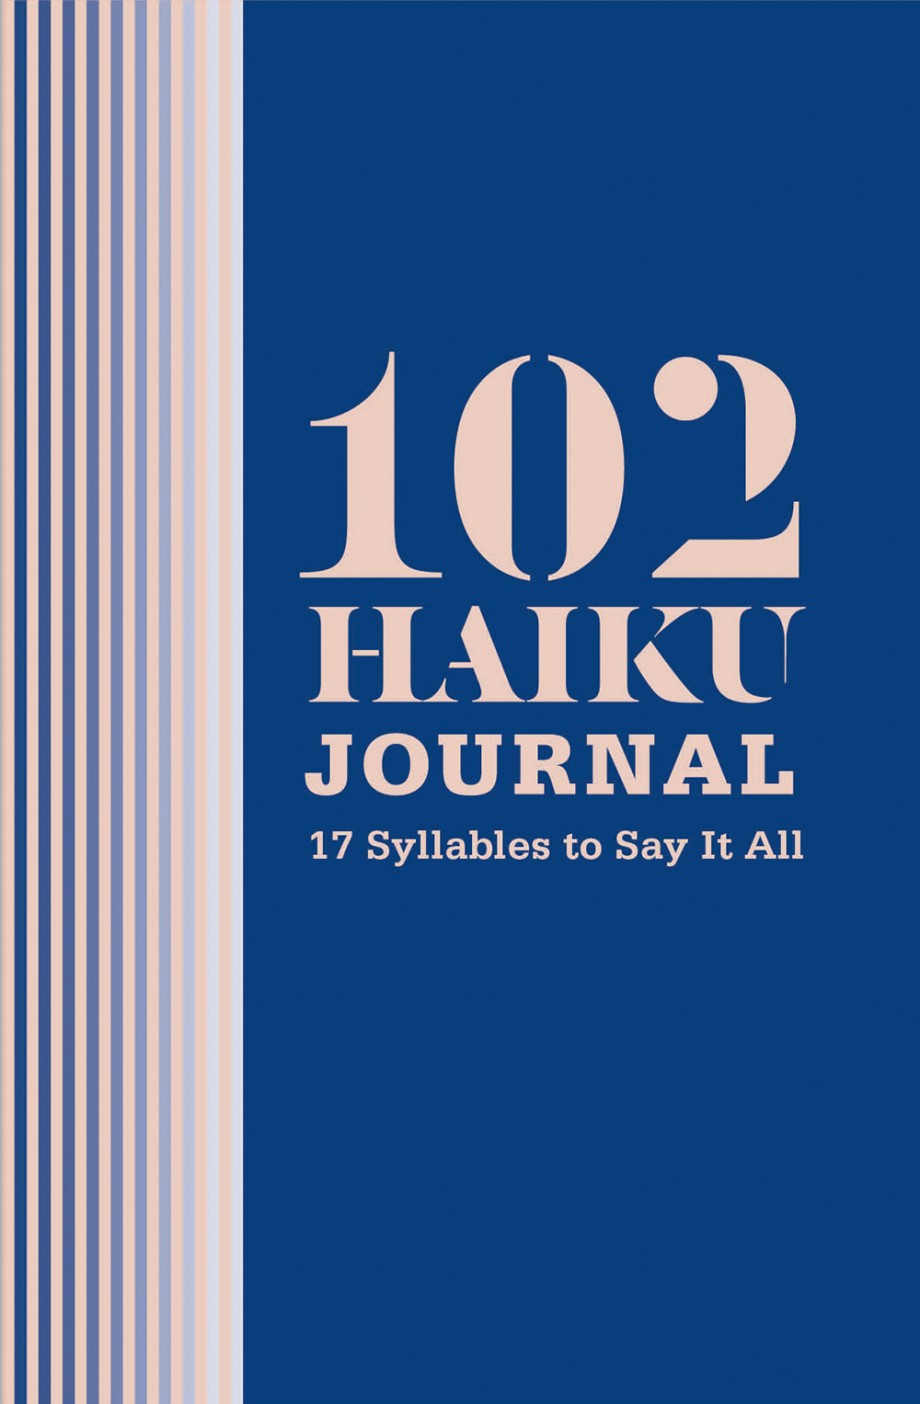 102 Haiku Journal 17 Syllables to Say It All